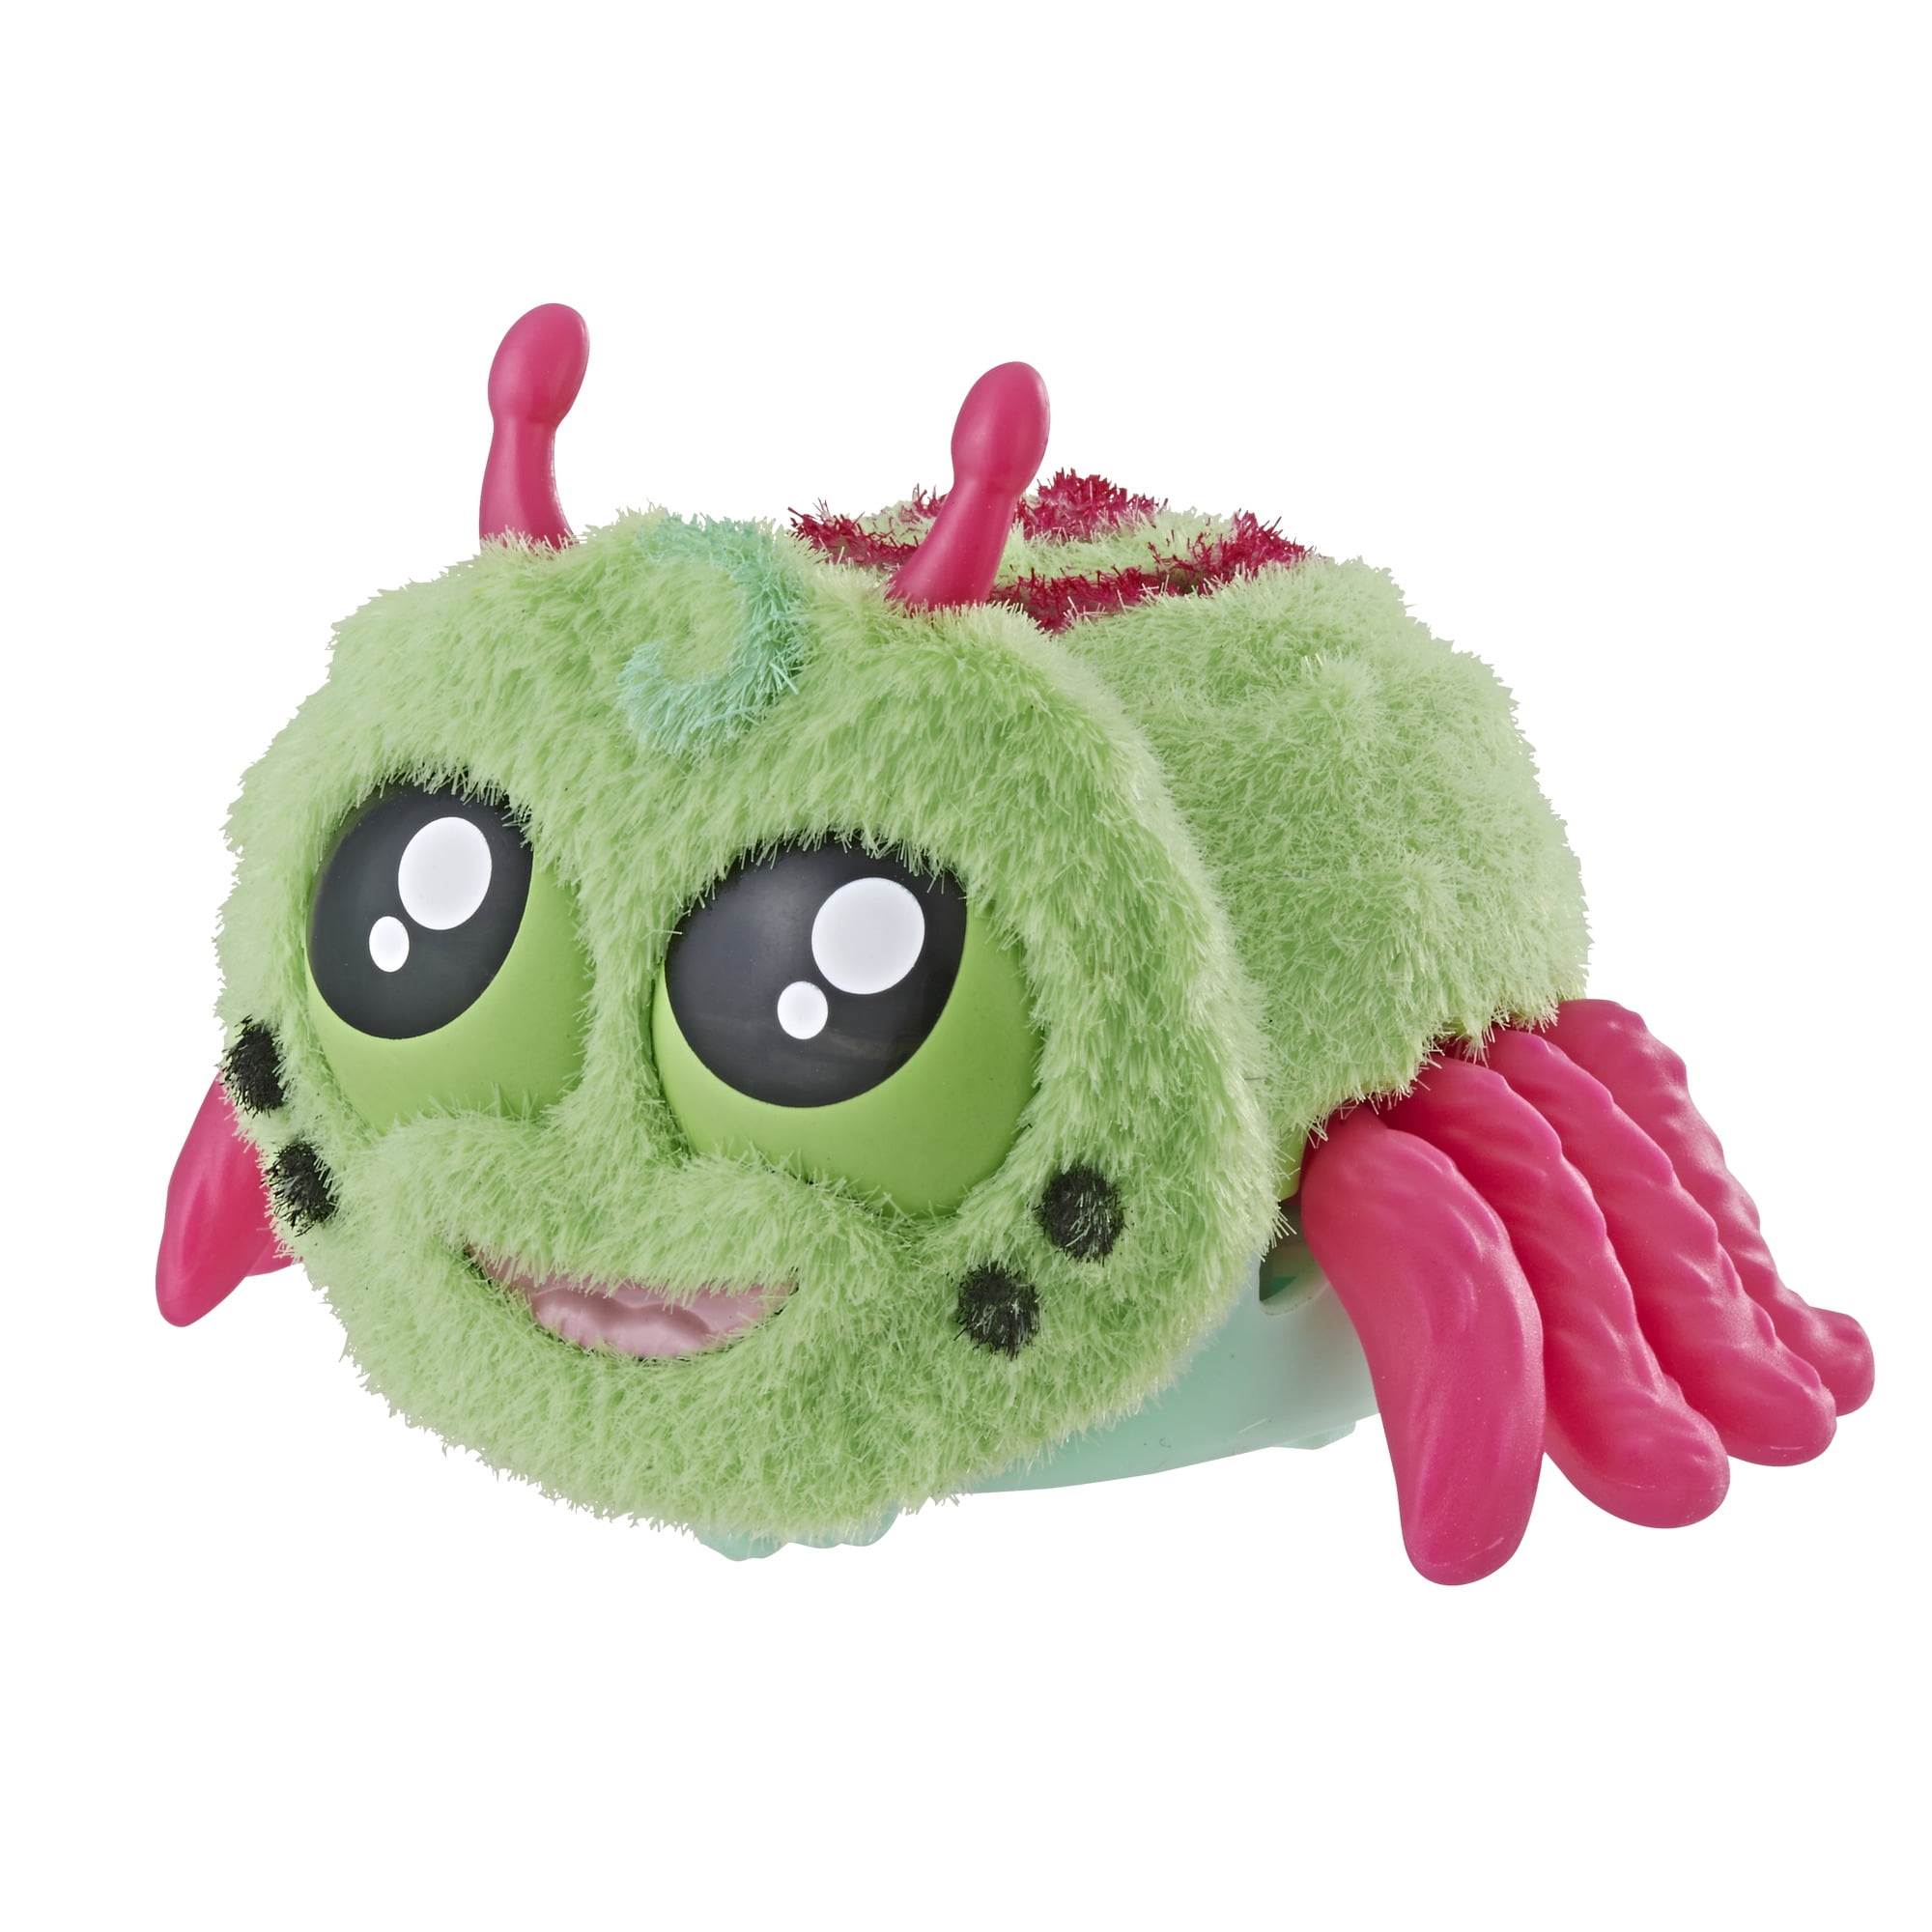 Hasbro Yellies Wiggly Wriggles Voice-activated Spider Pet Ages 5 and up for sale online 